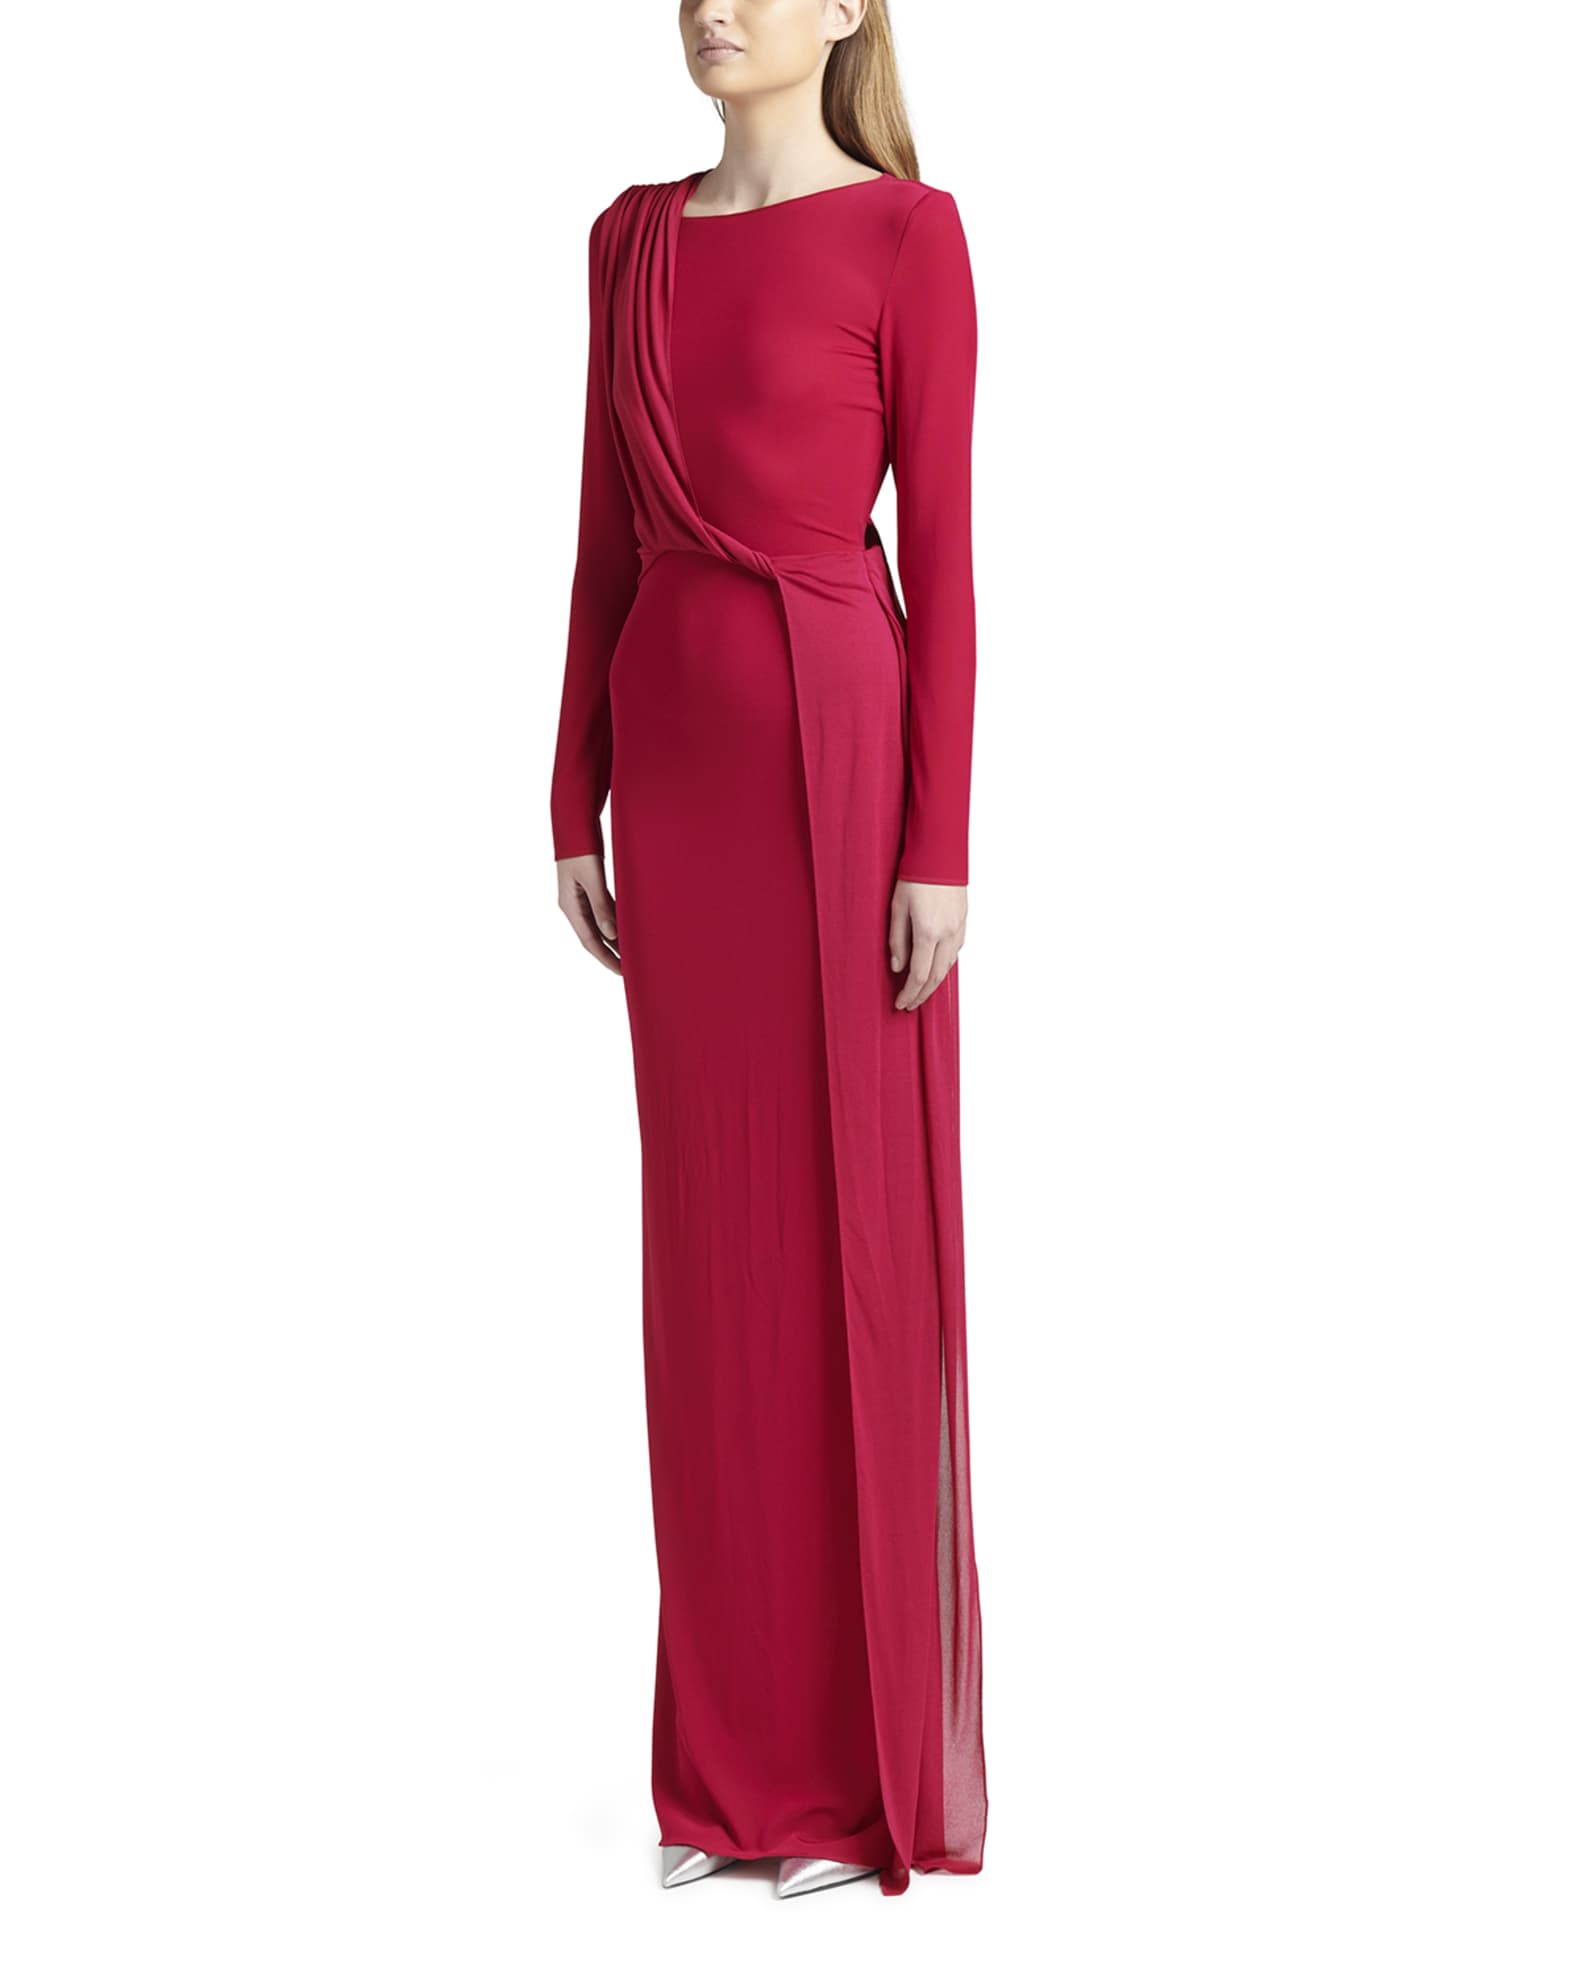 TOM FORD Twisted Drape Column Gown | Neiman Marcus